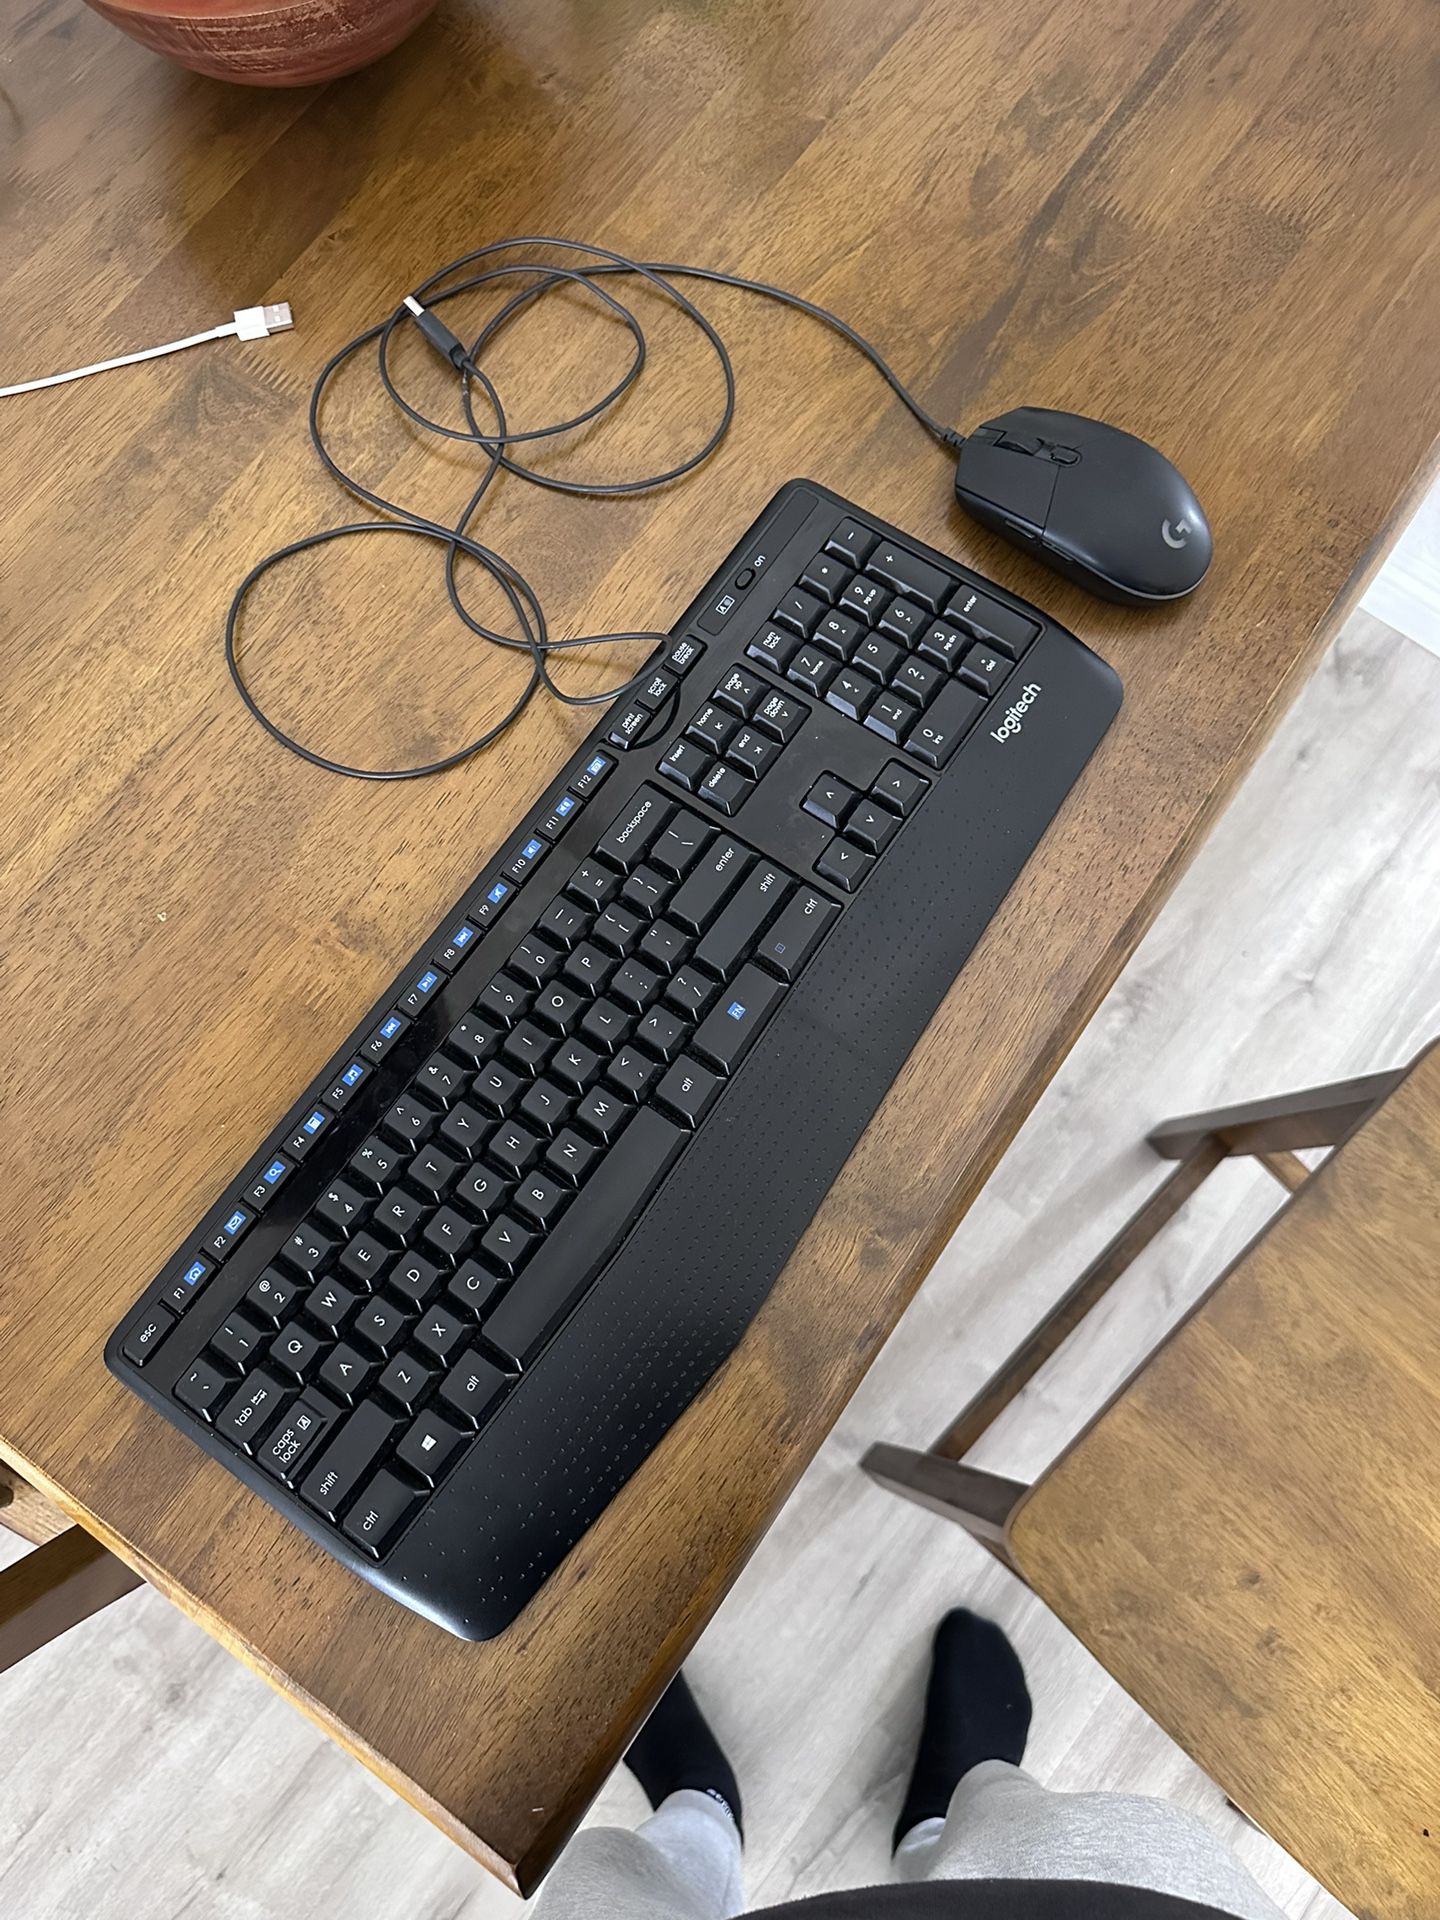 Logitech Keyboard And Mouse